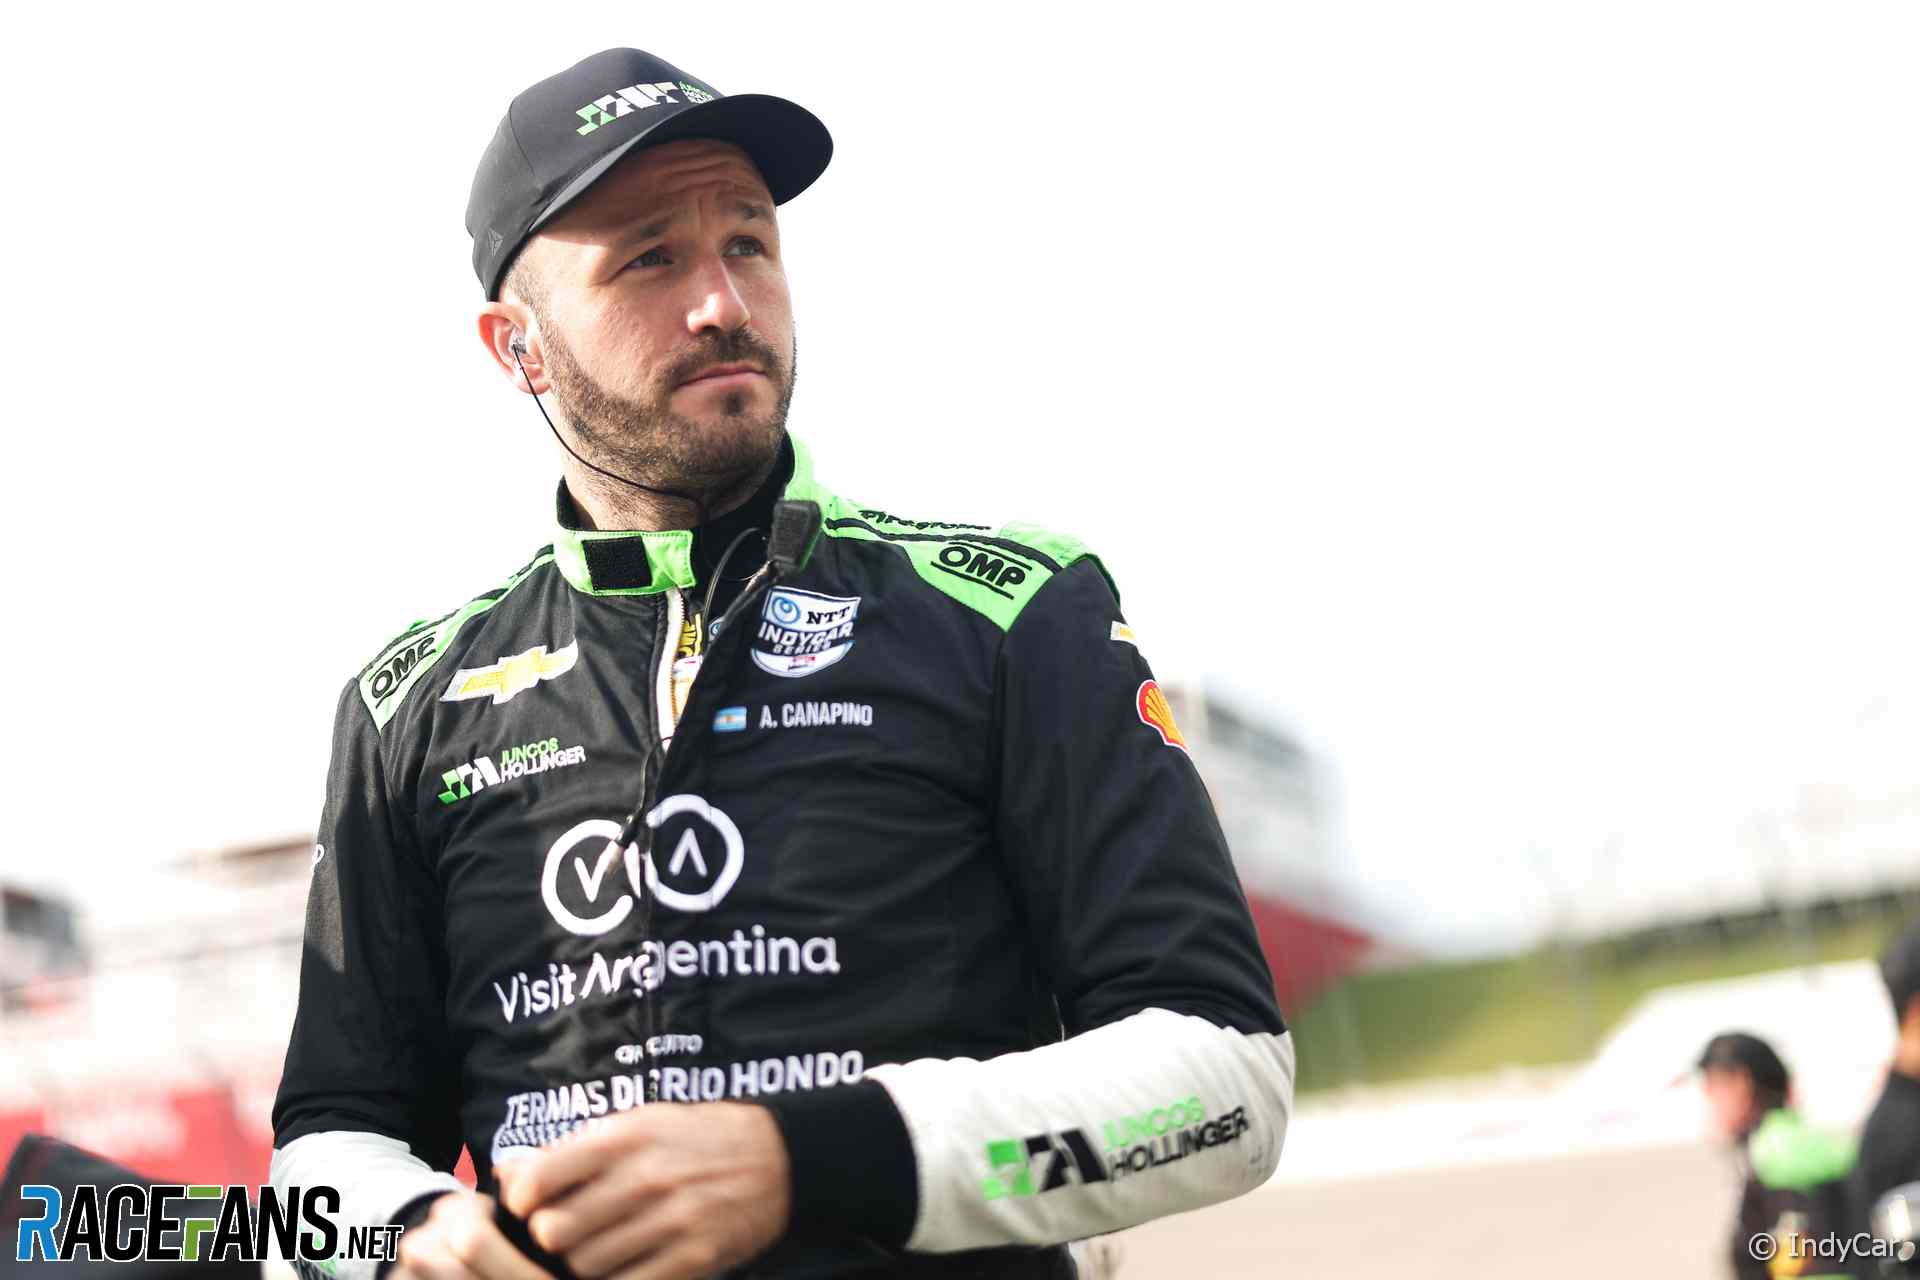 Canapino returning to finish season after social media row · IndyCar · RaceFans